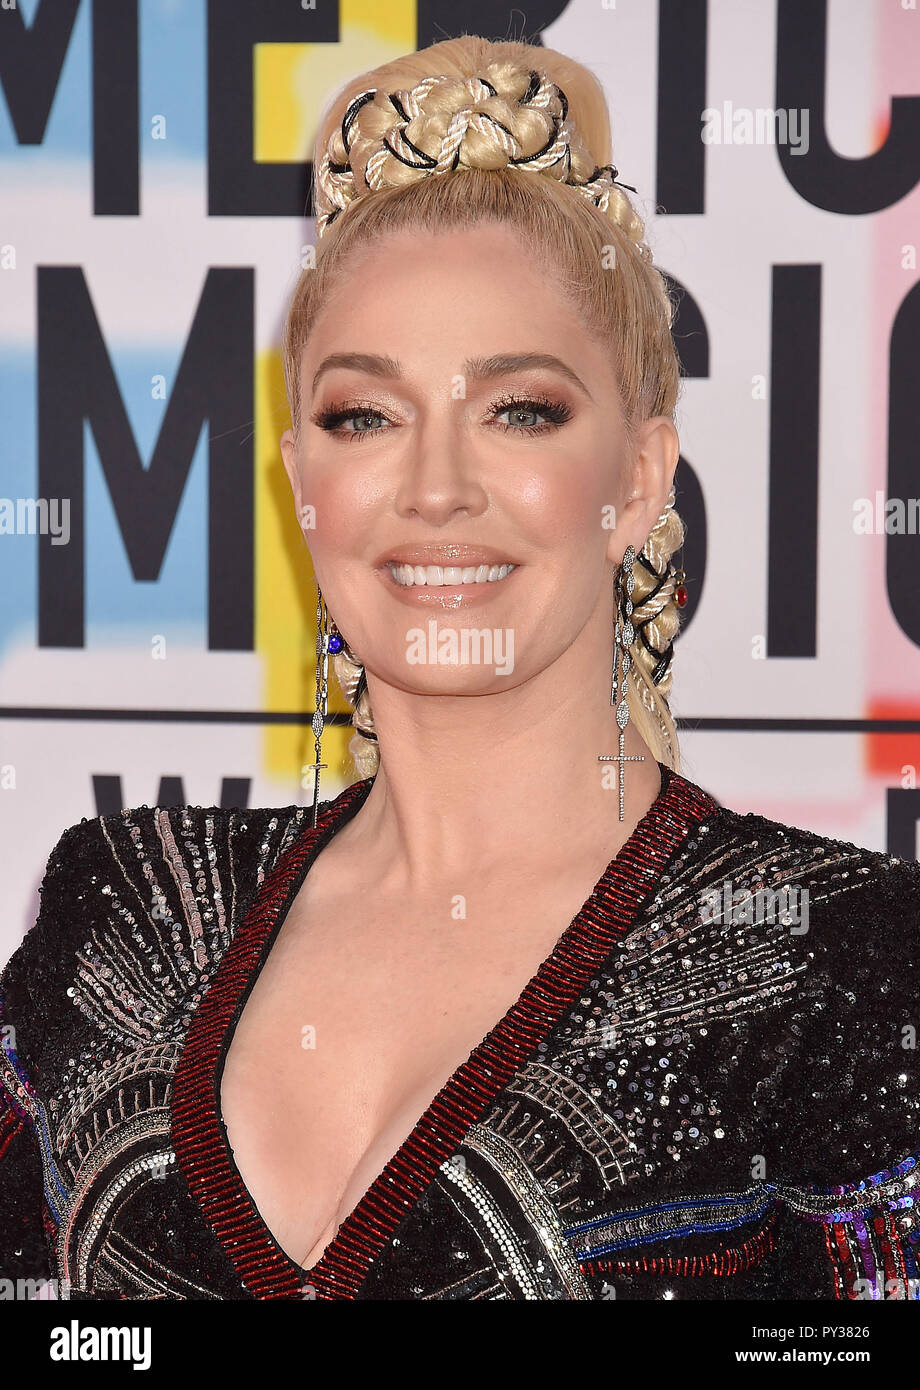 ERIKA JAYBNE US TV persoanlity at the 2018 American Music Awards at Microsoft Theater on October 9, 2018 in Los Angeles, California. Stock Photo